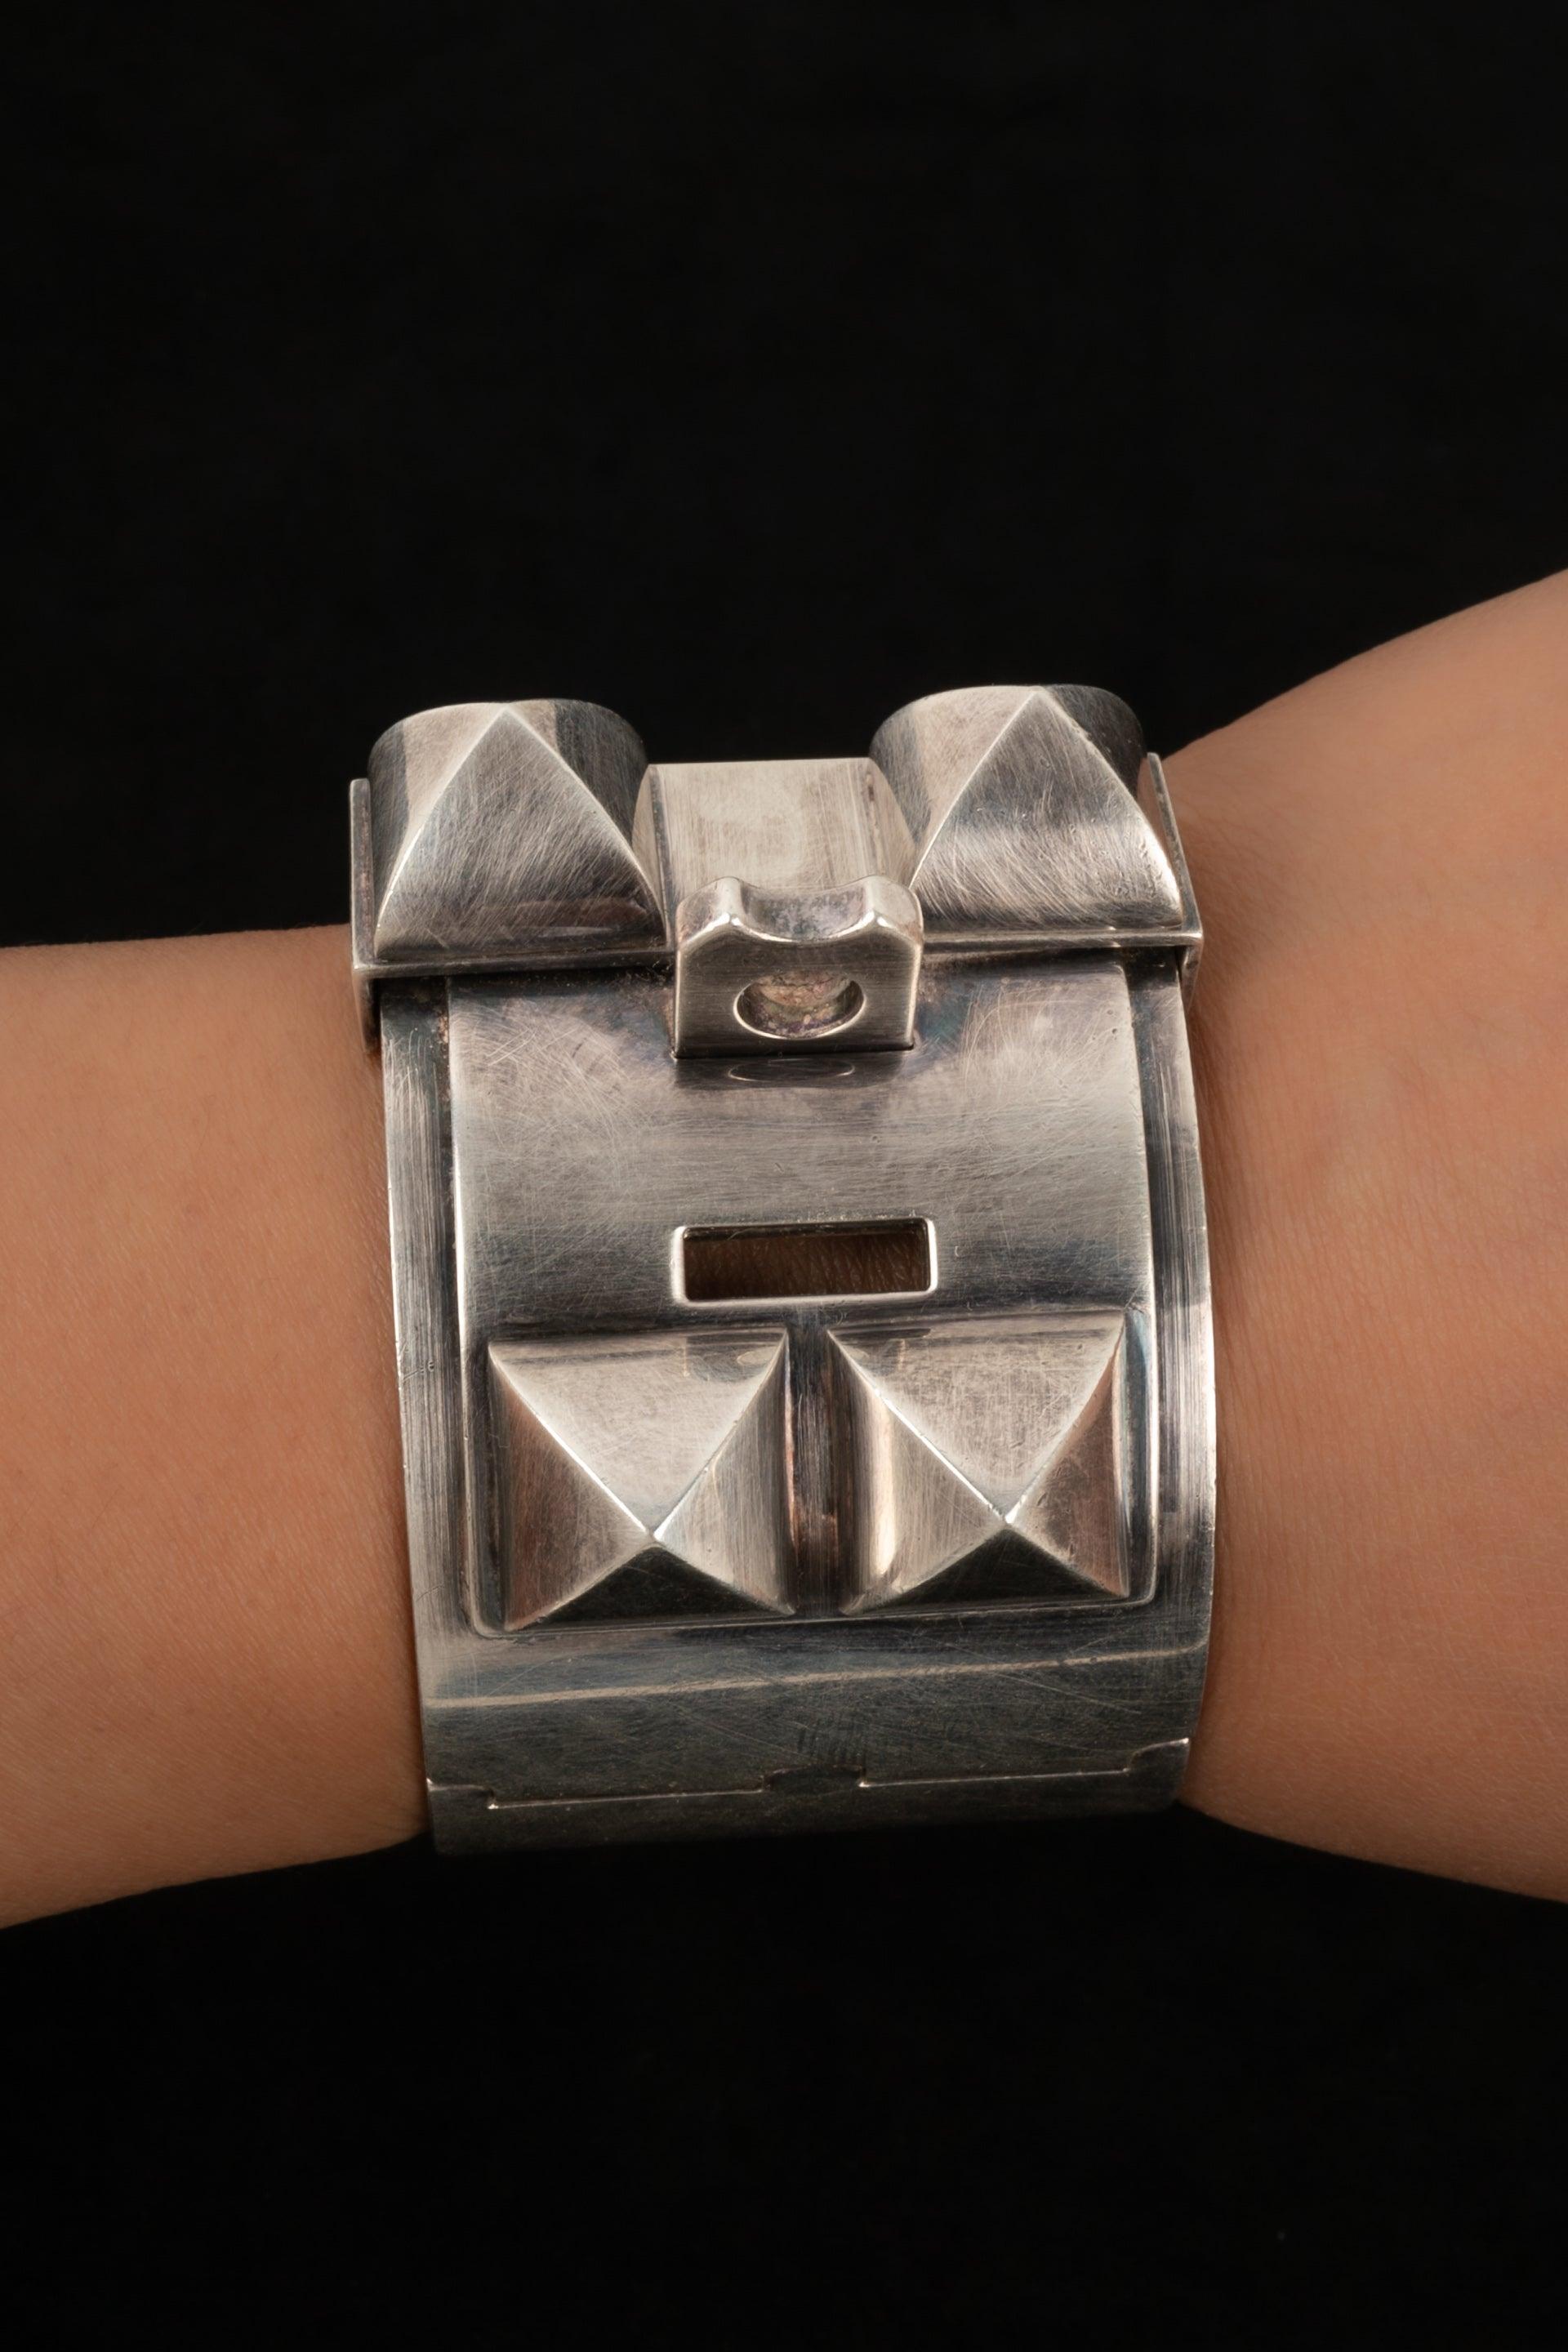 Hermès - Silver Médor Cuff Bracelet.

Additional information:
Condition: Good condition
Dimensions: Circumference: 15.5 cm - Opening: 3.3 cm

Seller Reference: BRA166